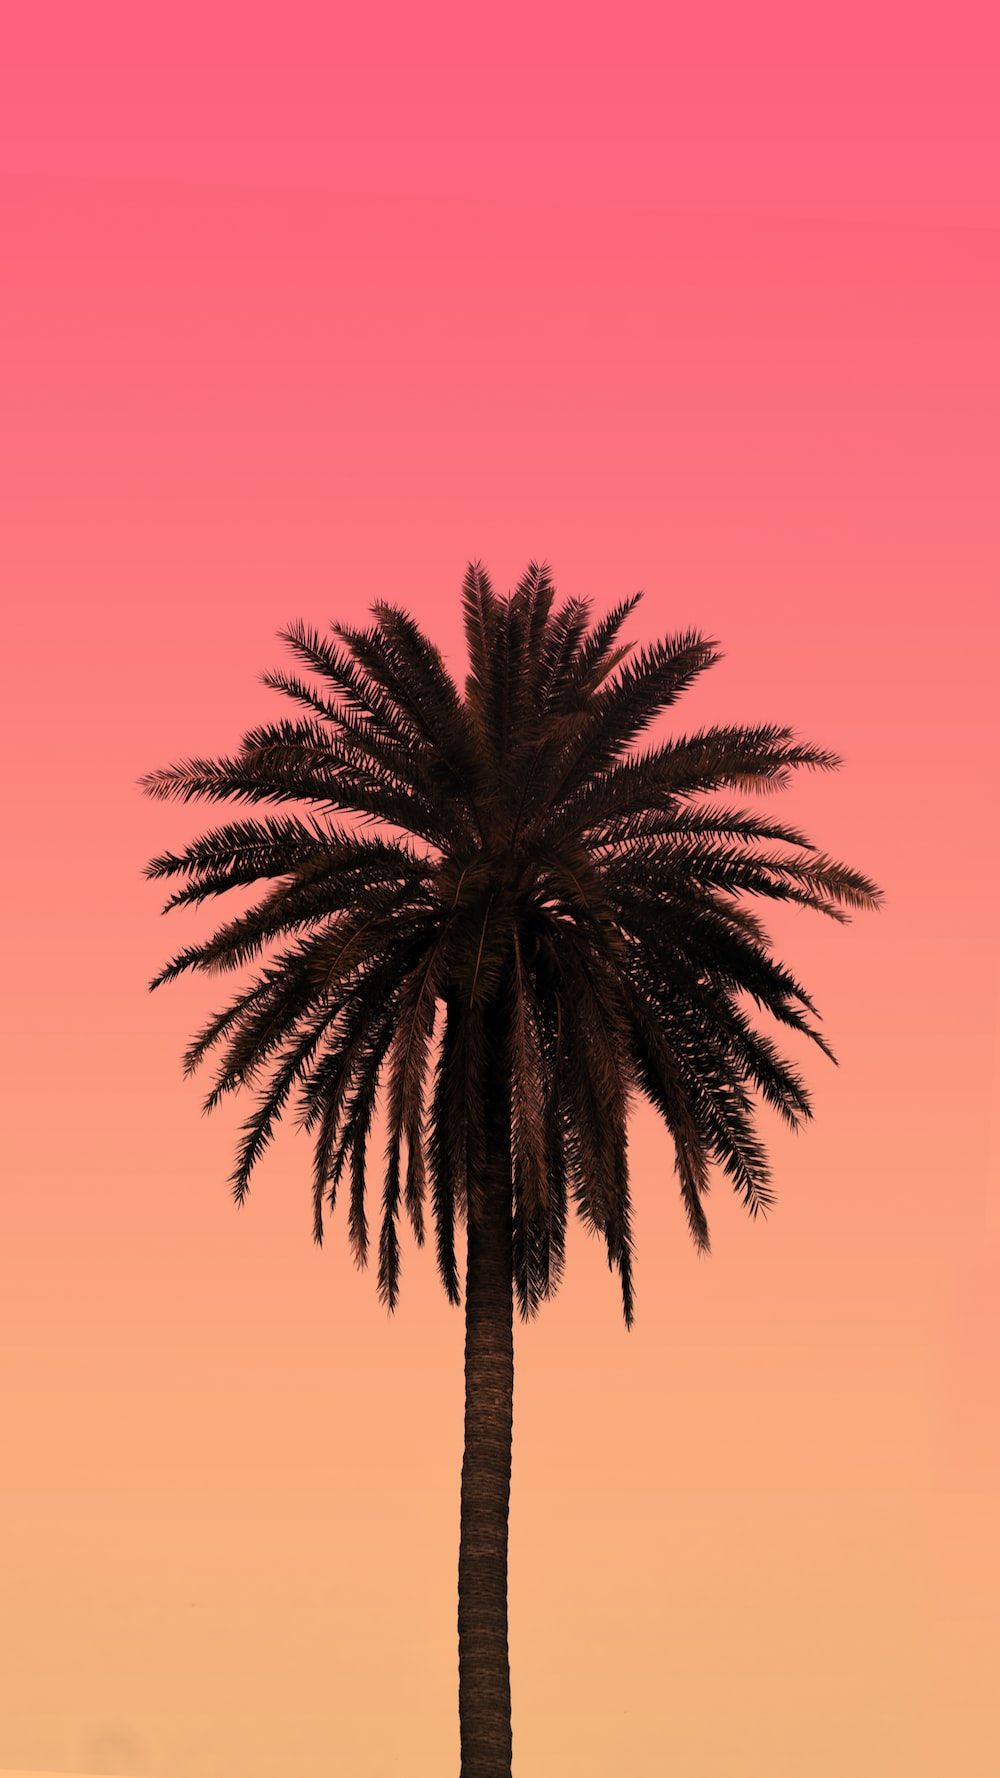 A palm tree in front of an orange sky - Palm tree